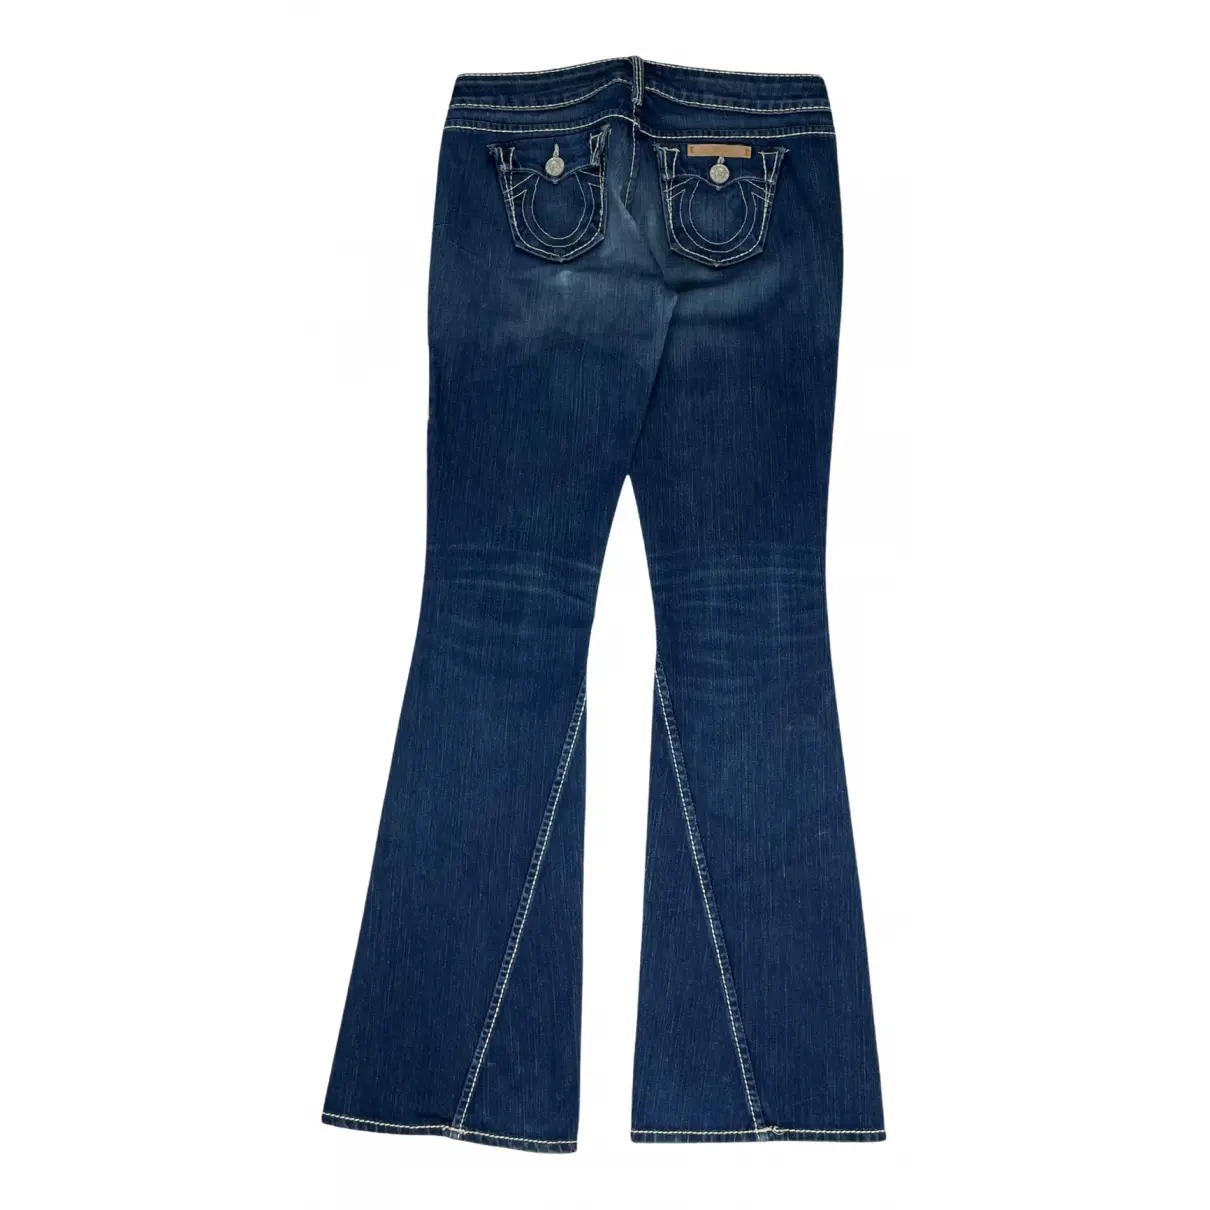 True Religion Straight jeans for sale